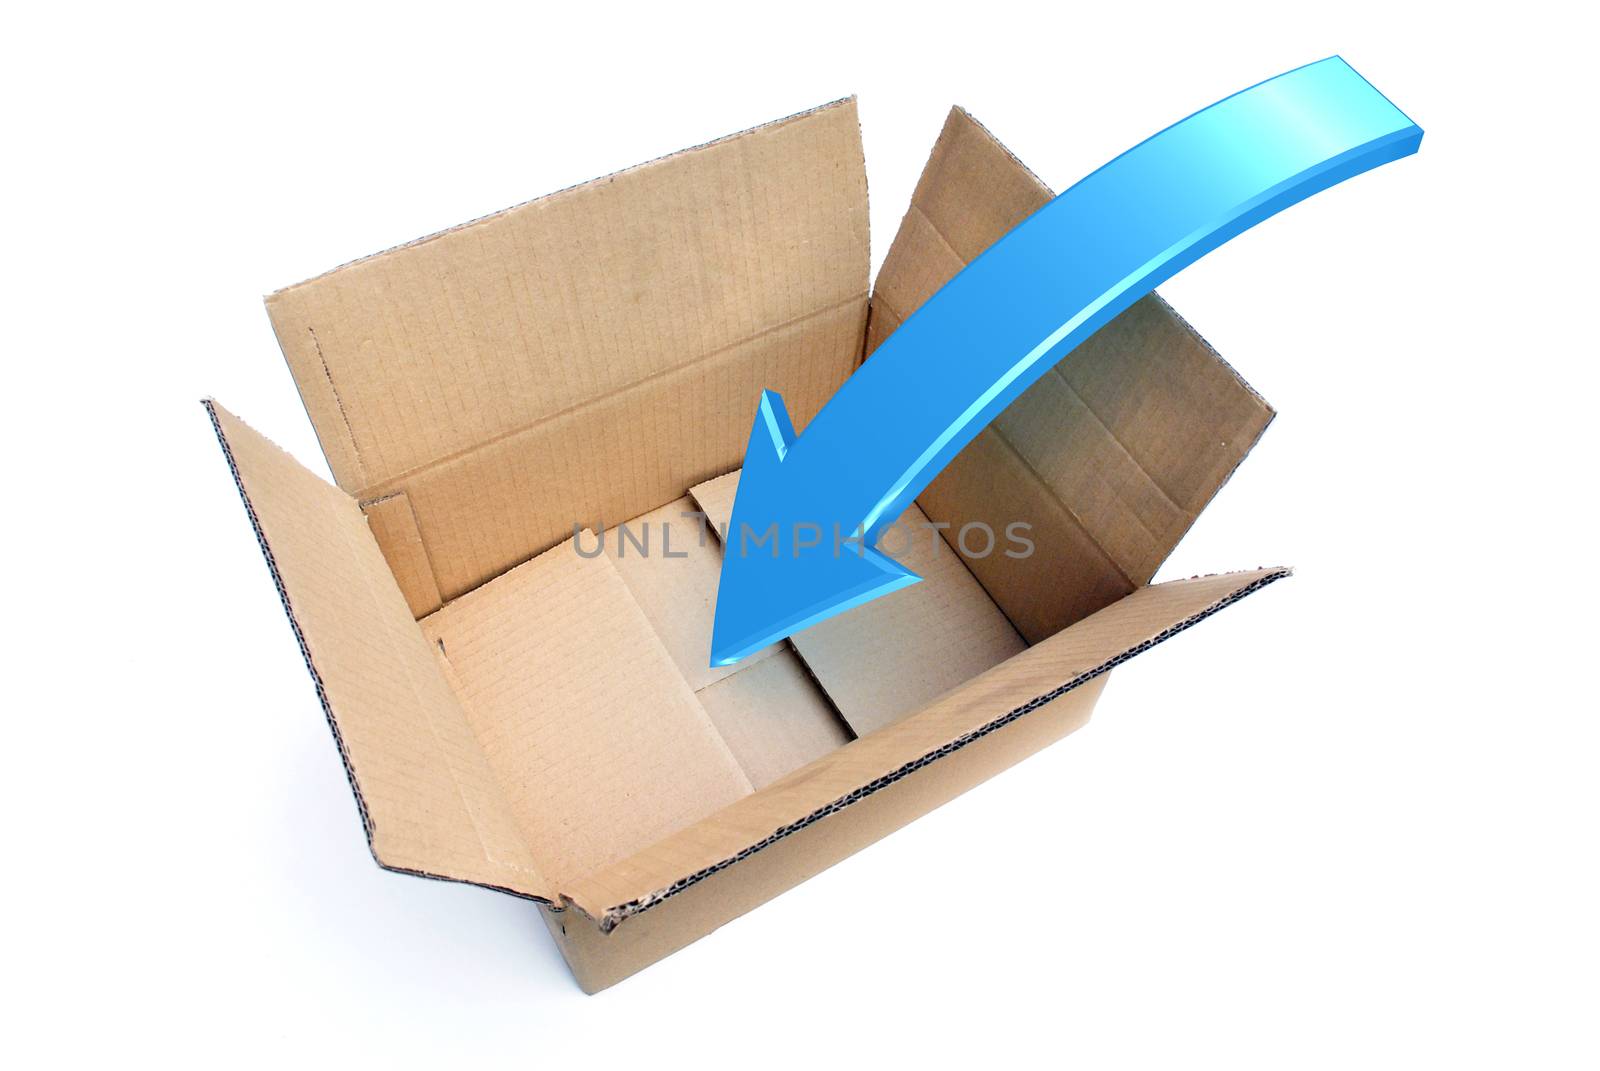 Box Packing Rendered Illustration by head-off